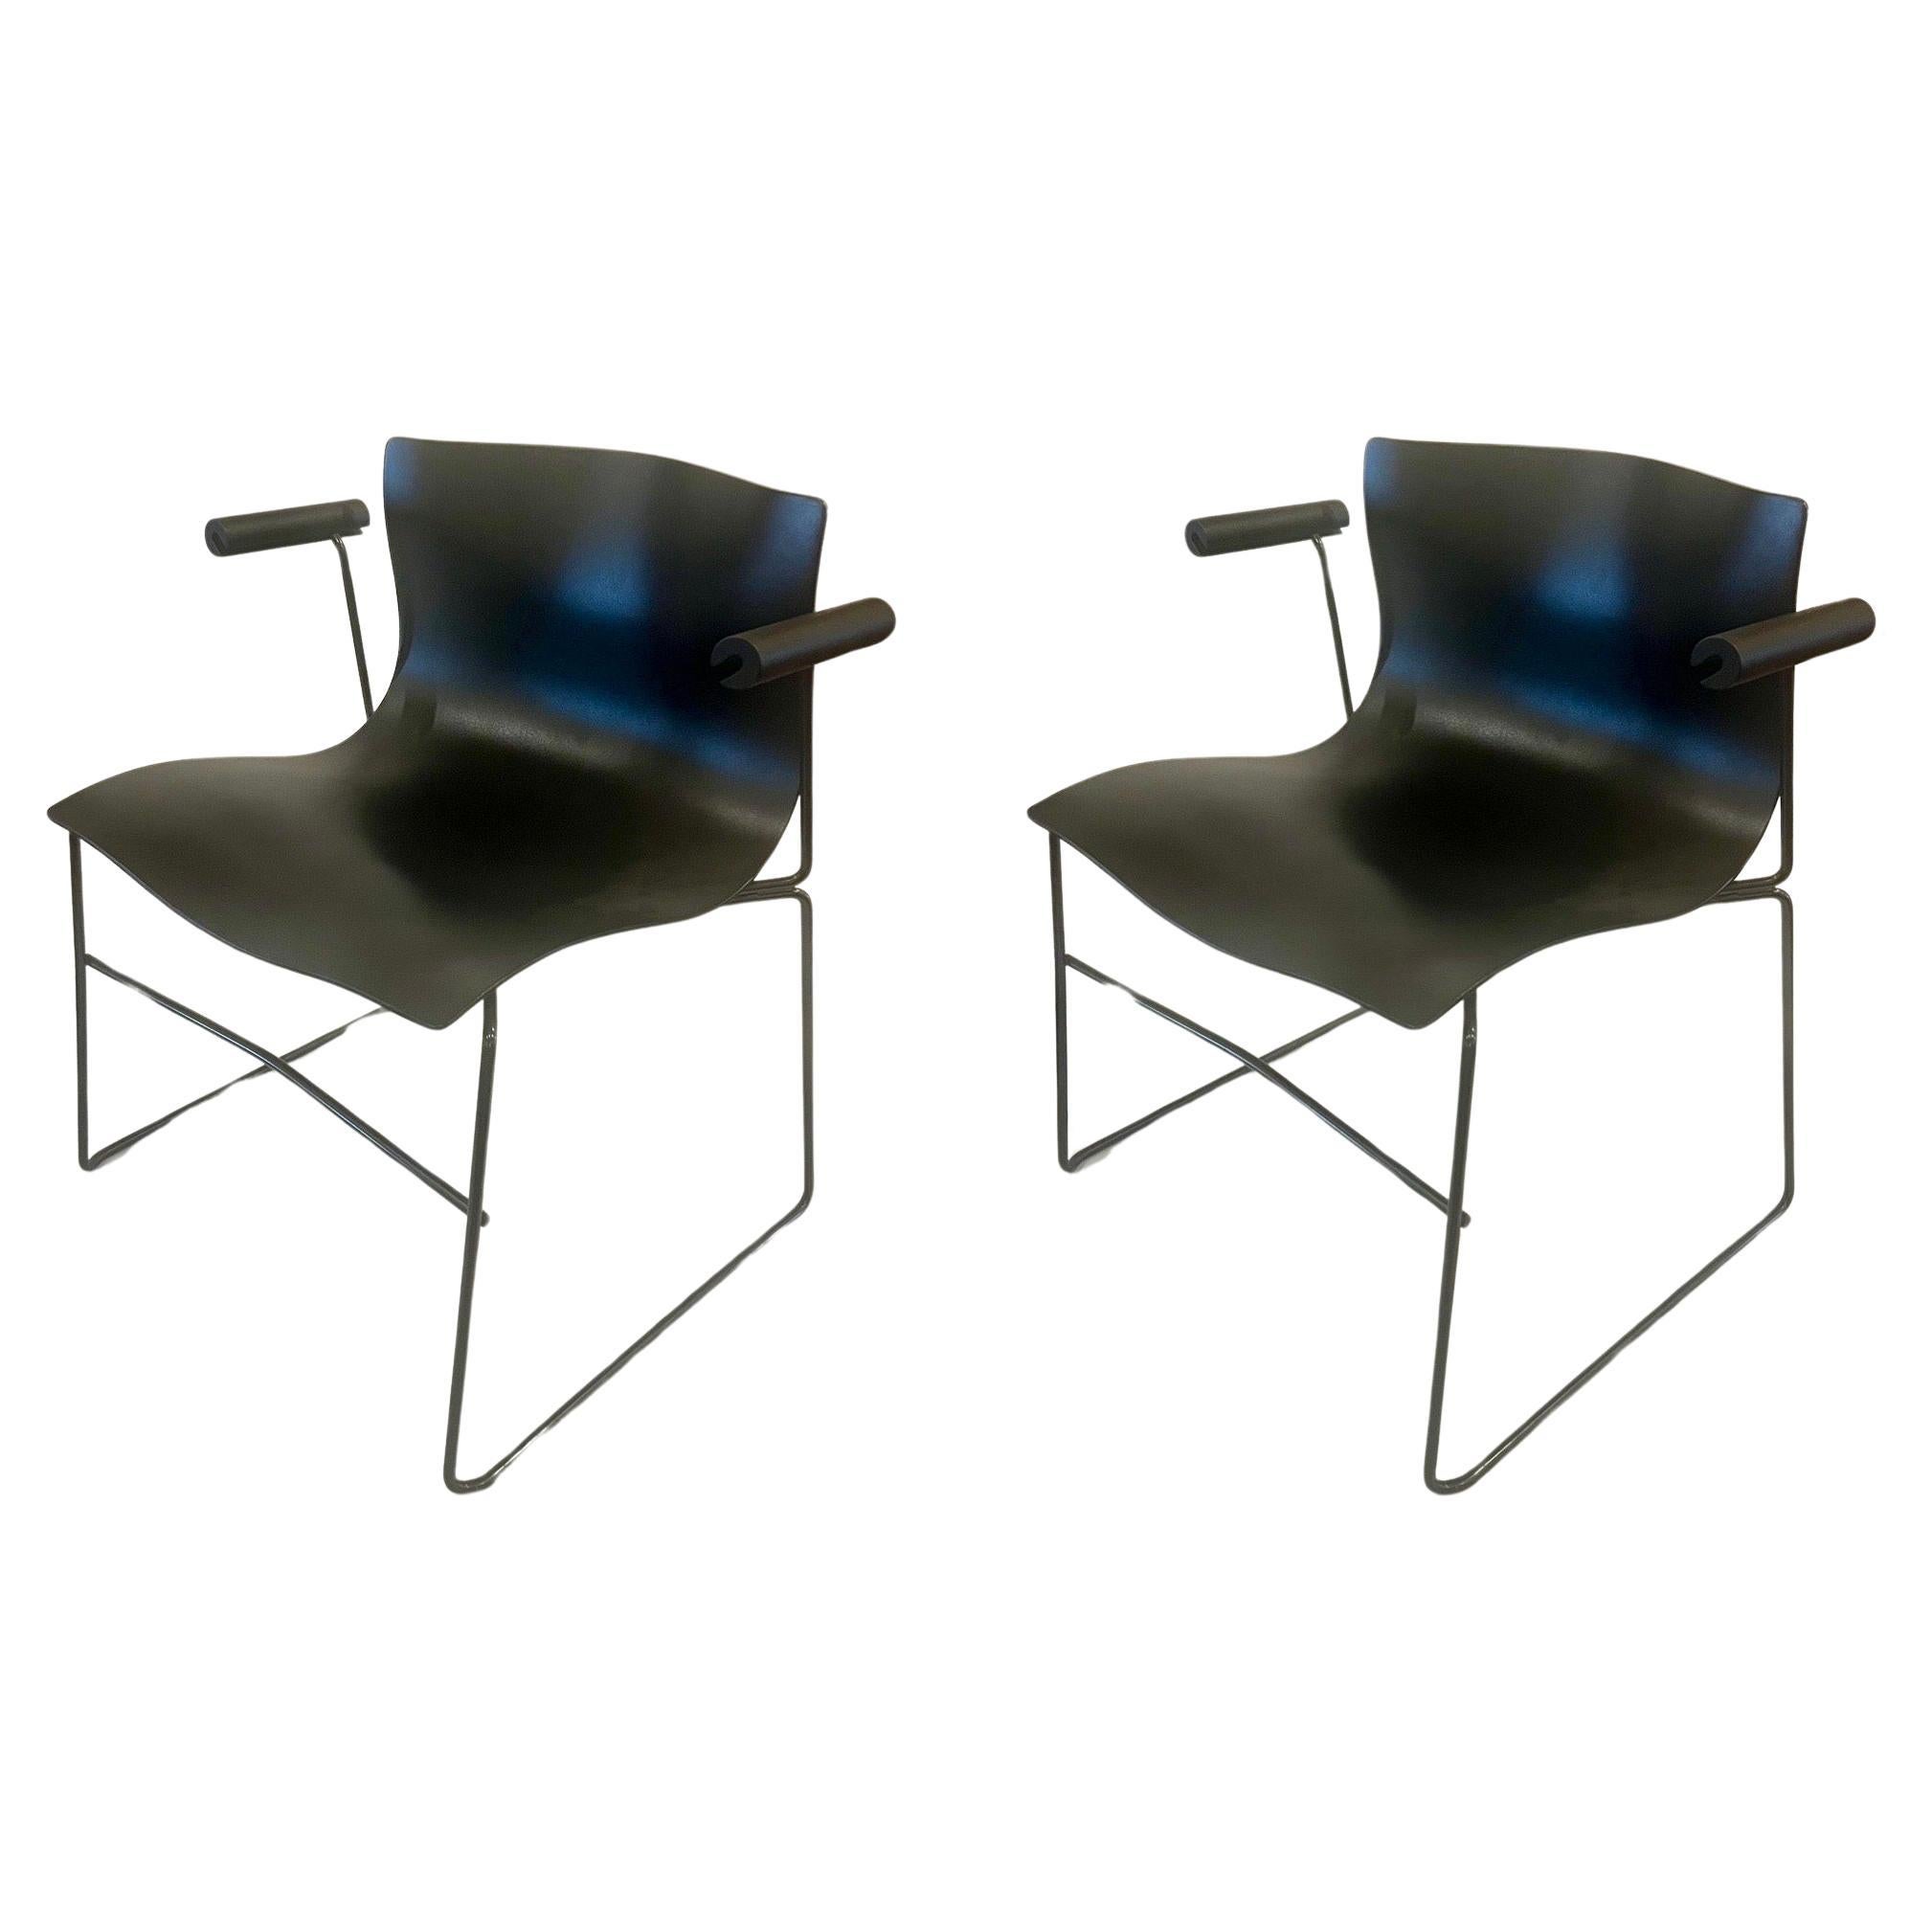 Pair of Handkerchief Armchairs  Designed by Massimo Vignelli for Knoll Studio